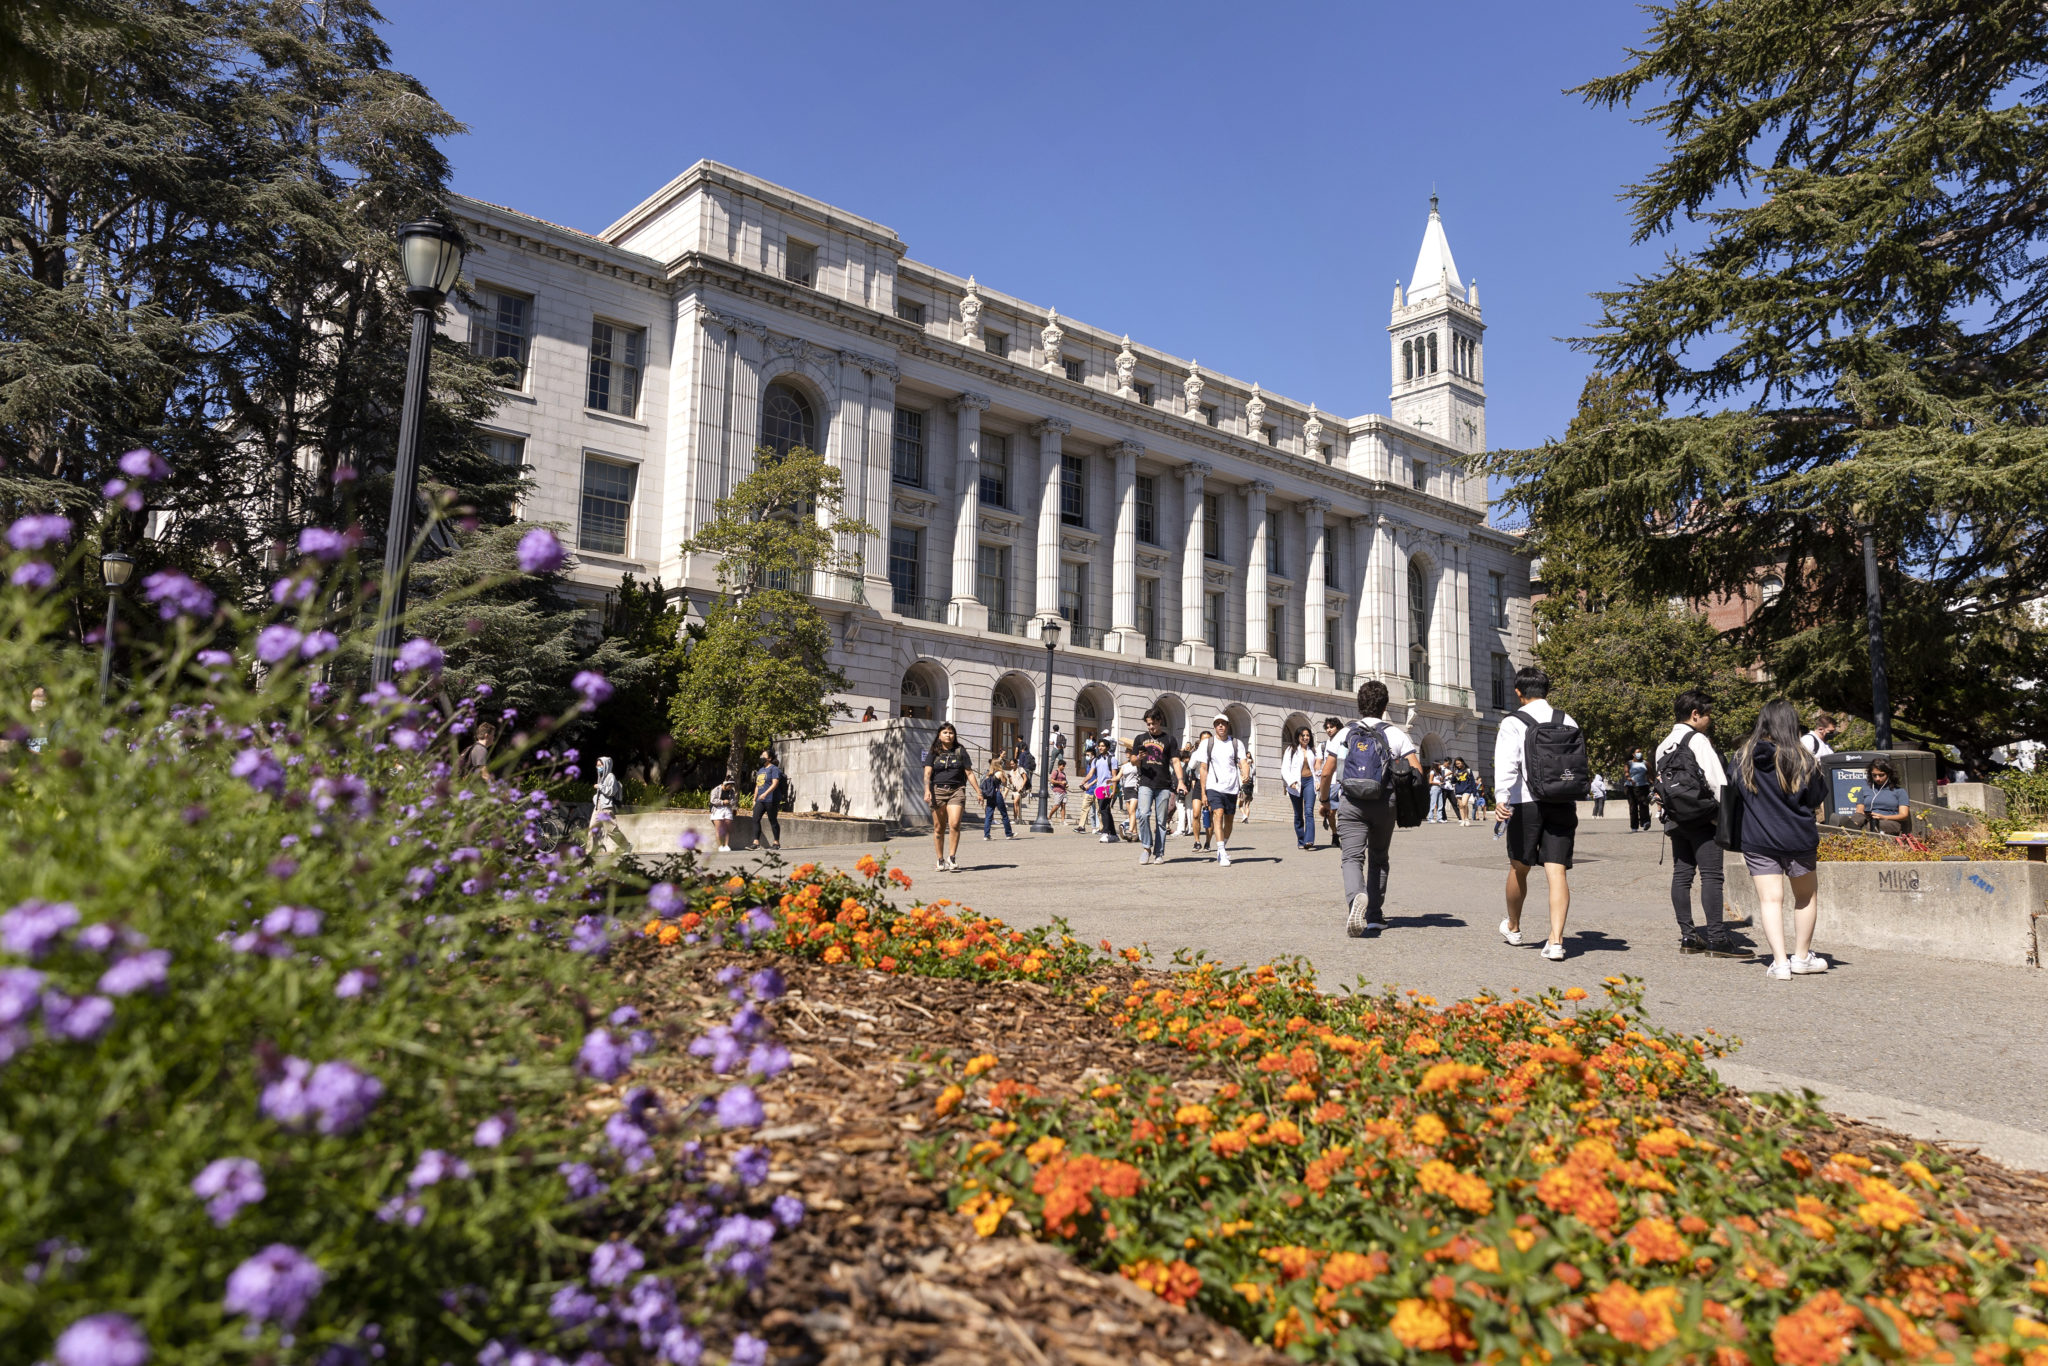 students walking on campus with flowers in the foreground